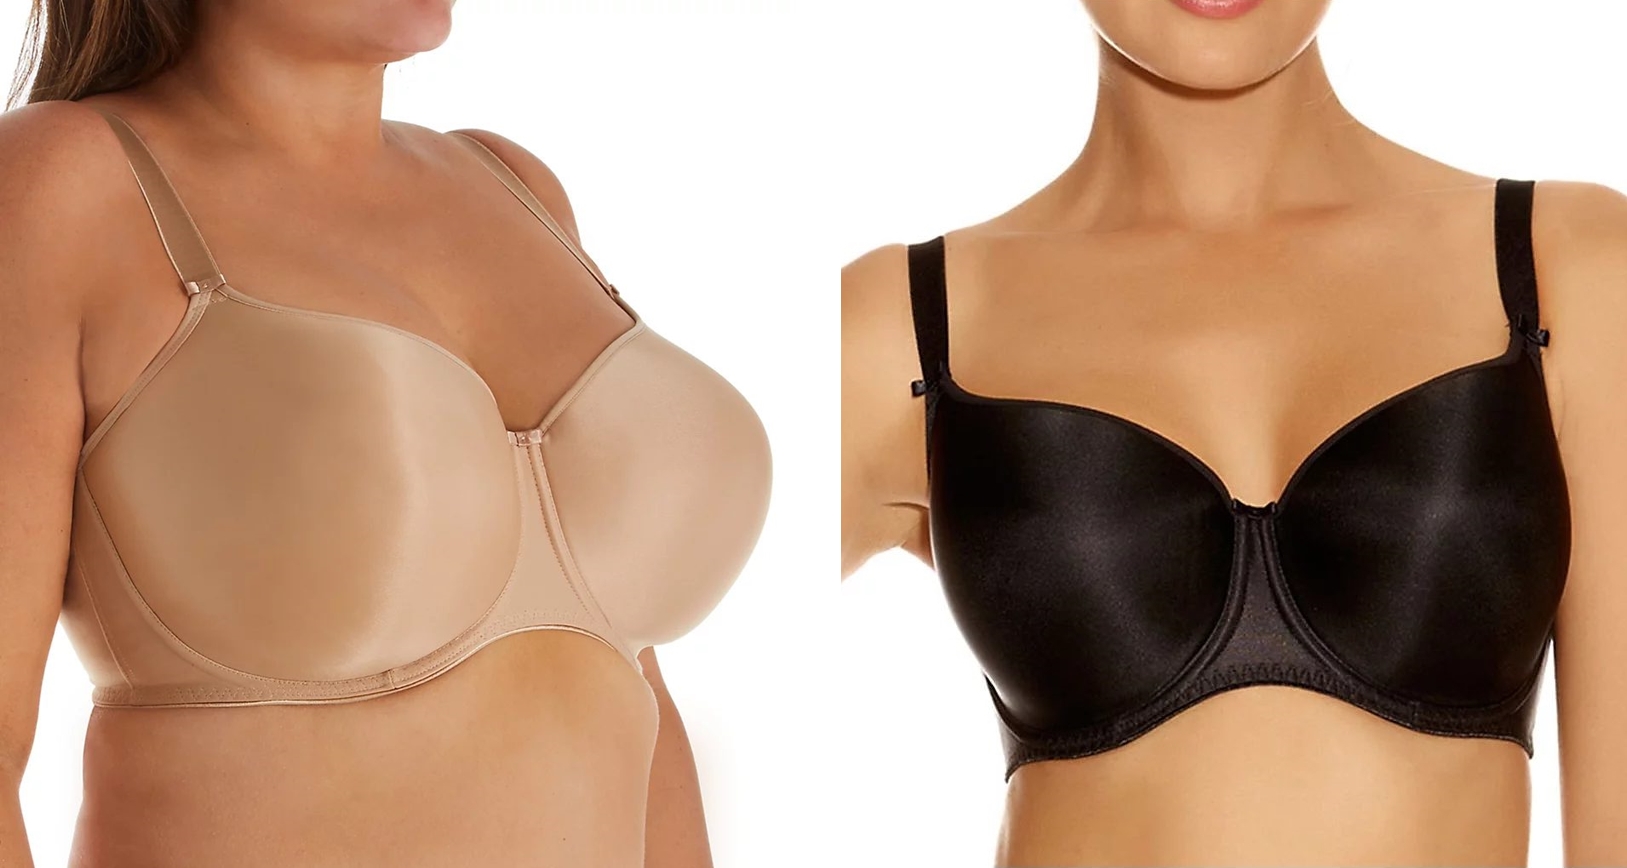 Want to boost your bustline? Take a look at a plus size push up bra with removable padding.